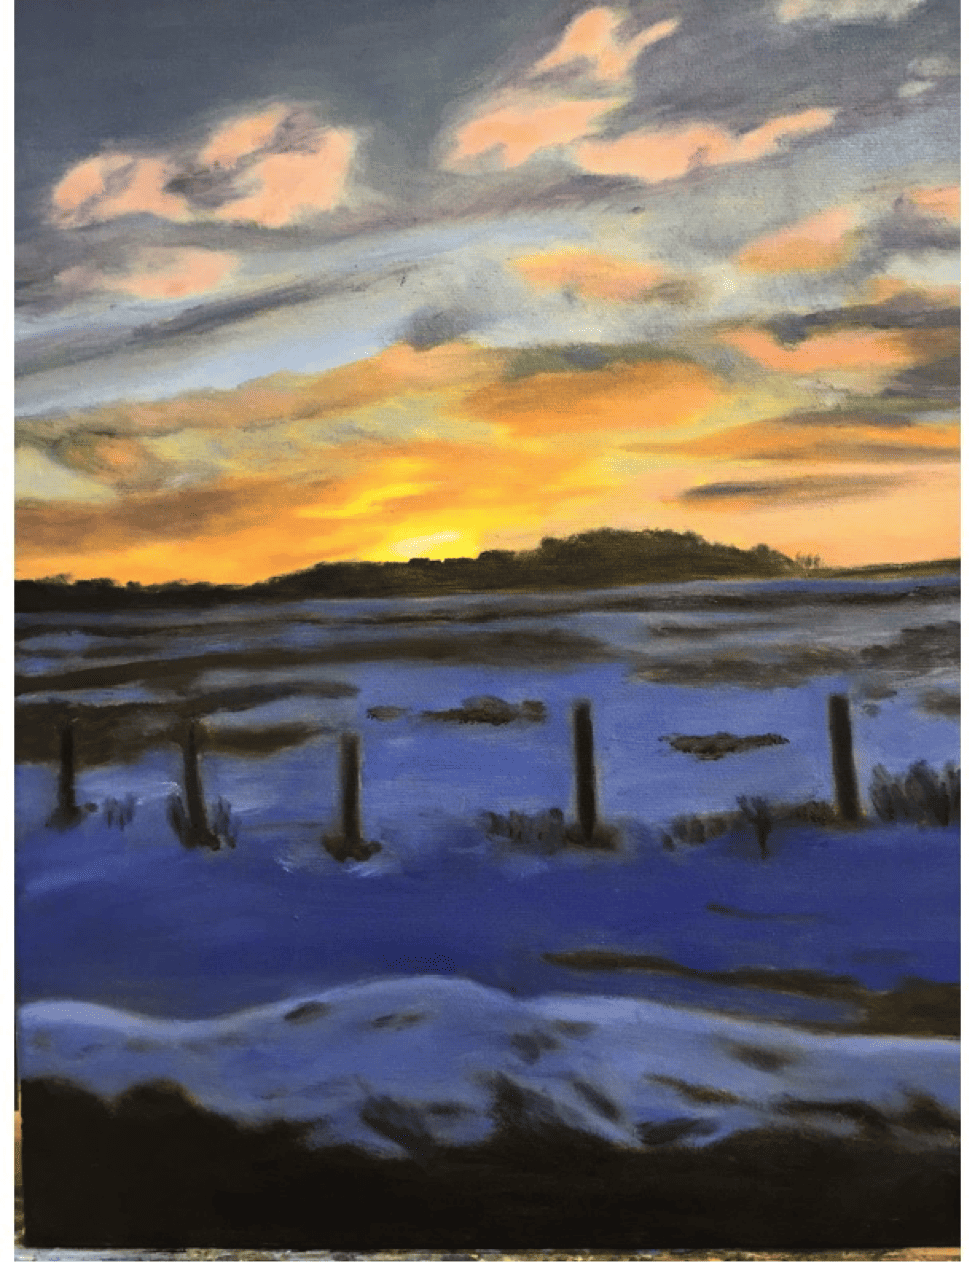 Sunset over Snowy Field